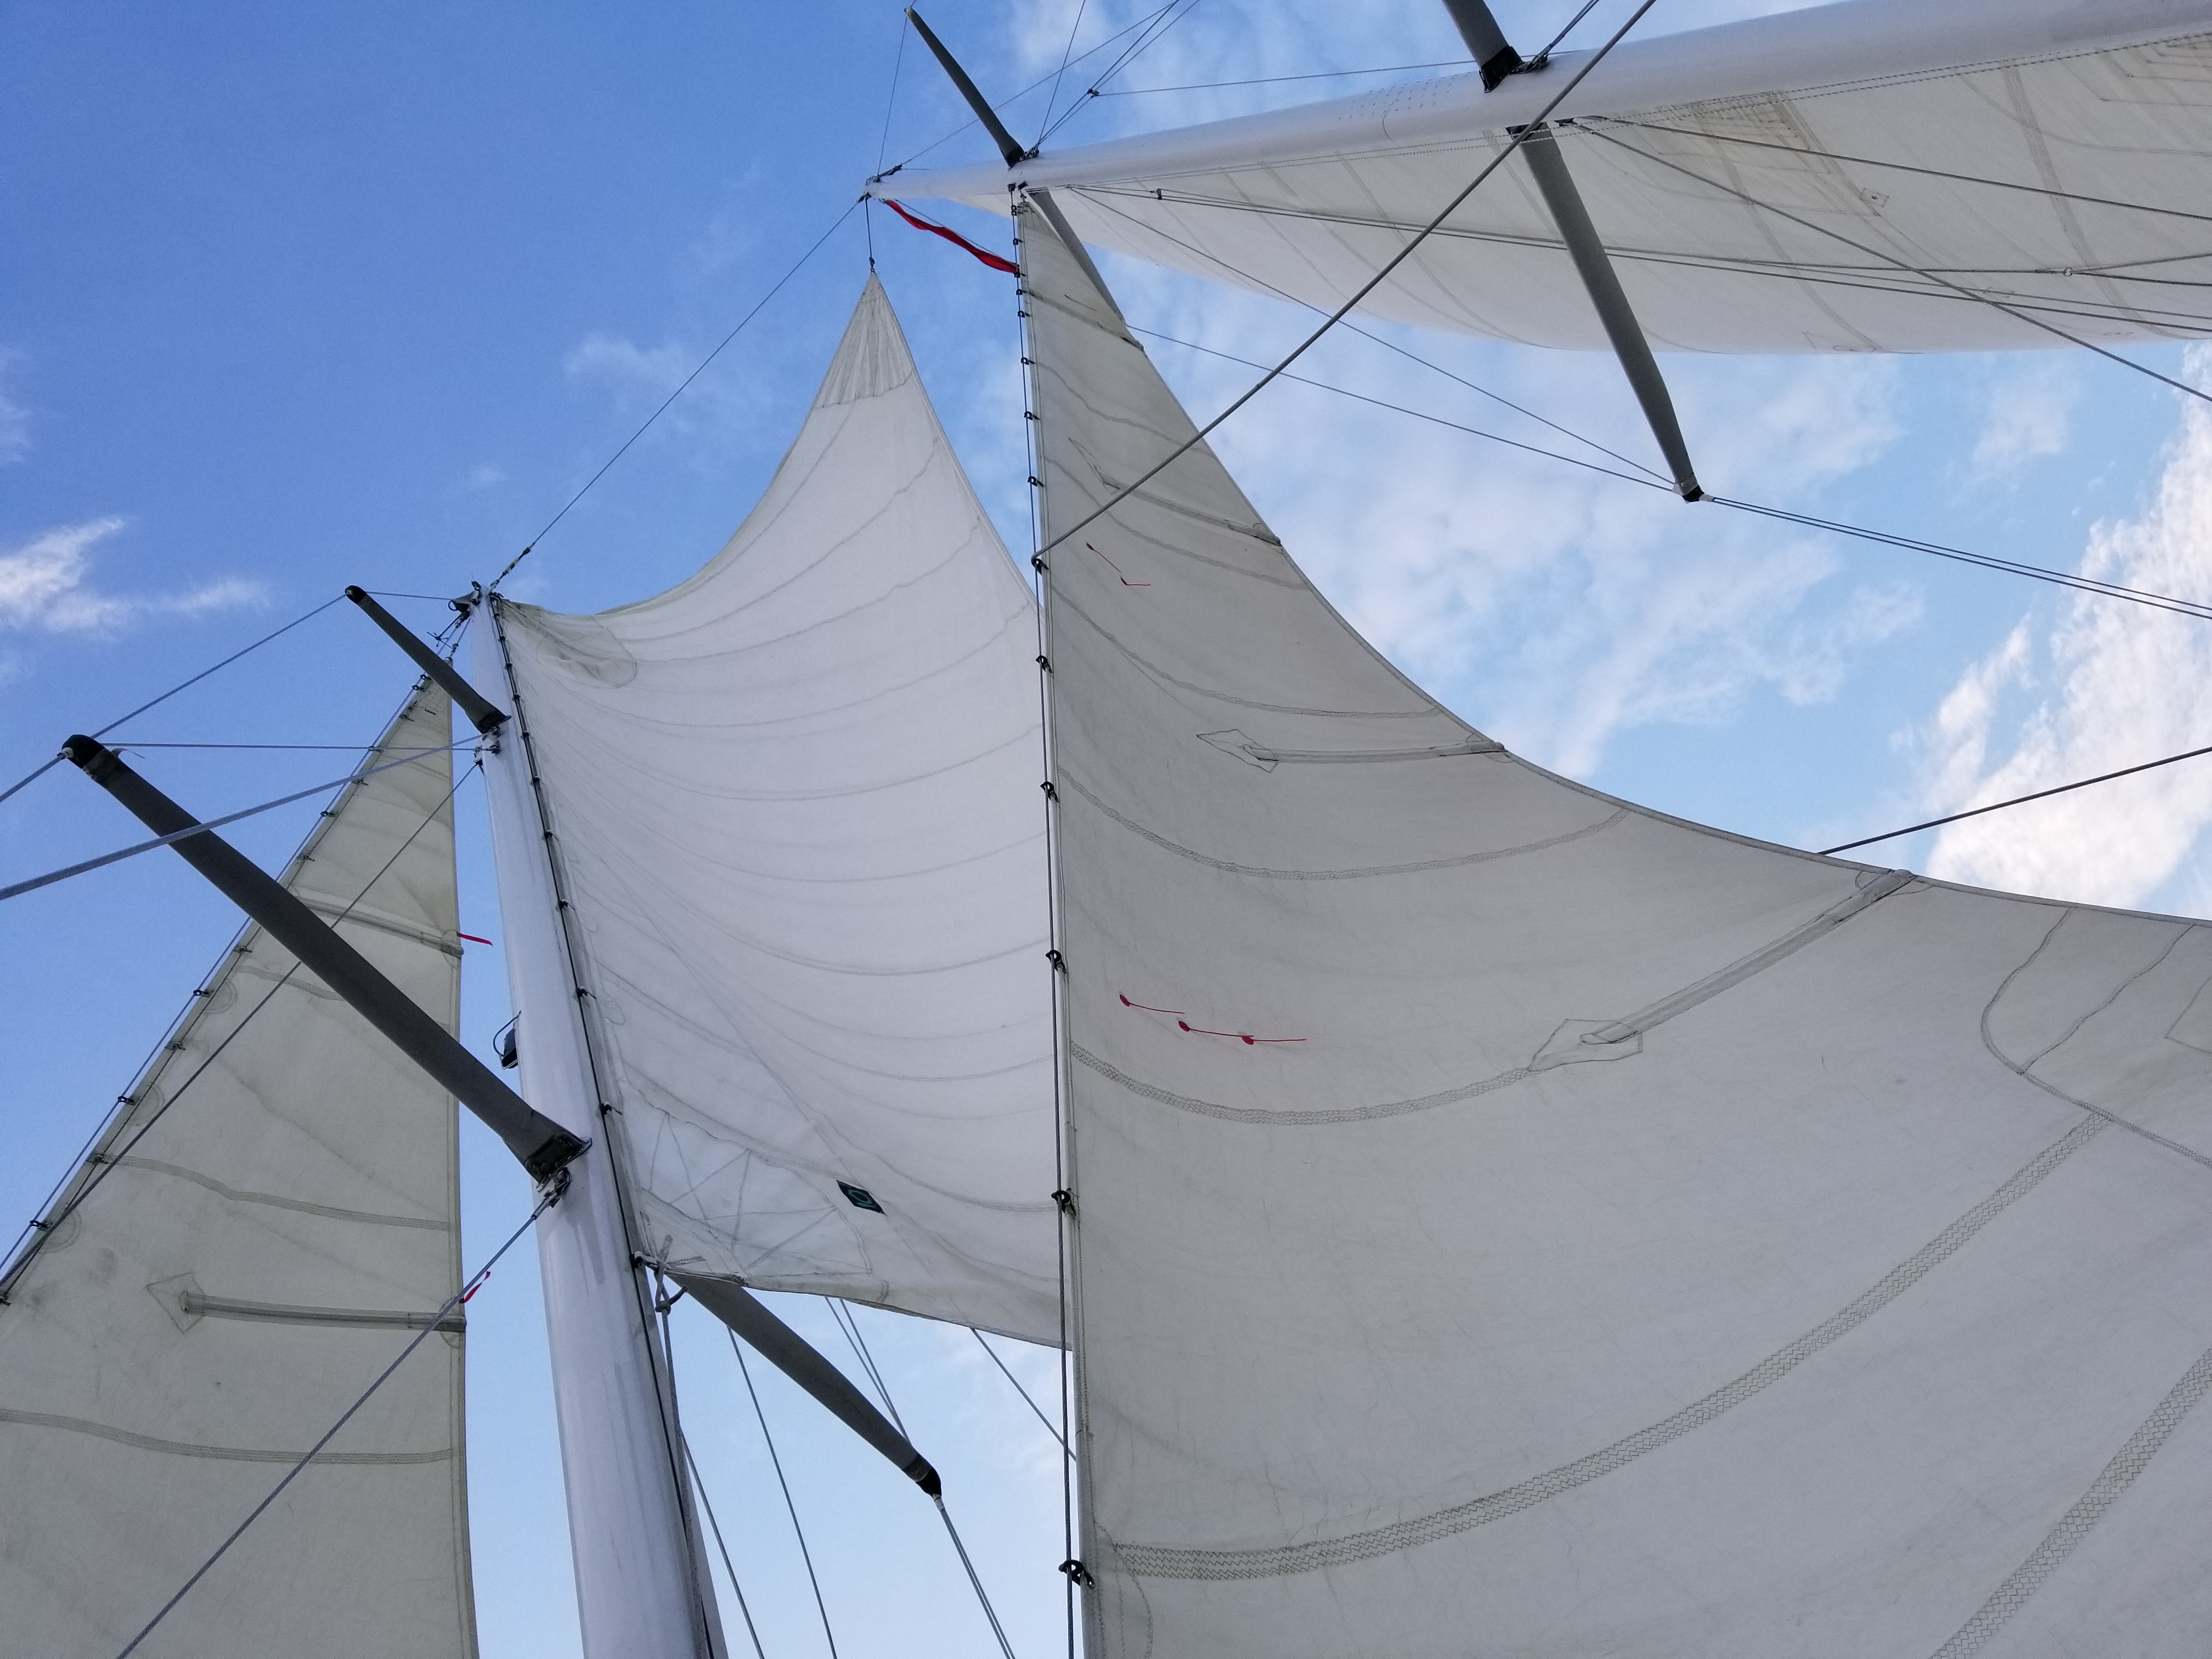 Looking through the sails into blue skies with clouds